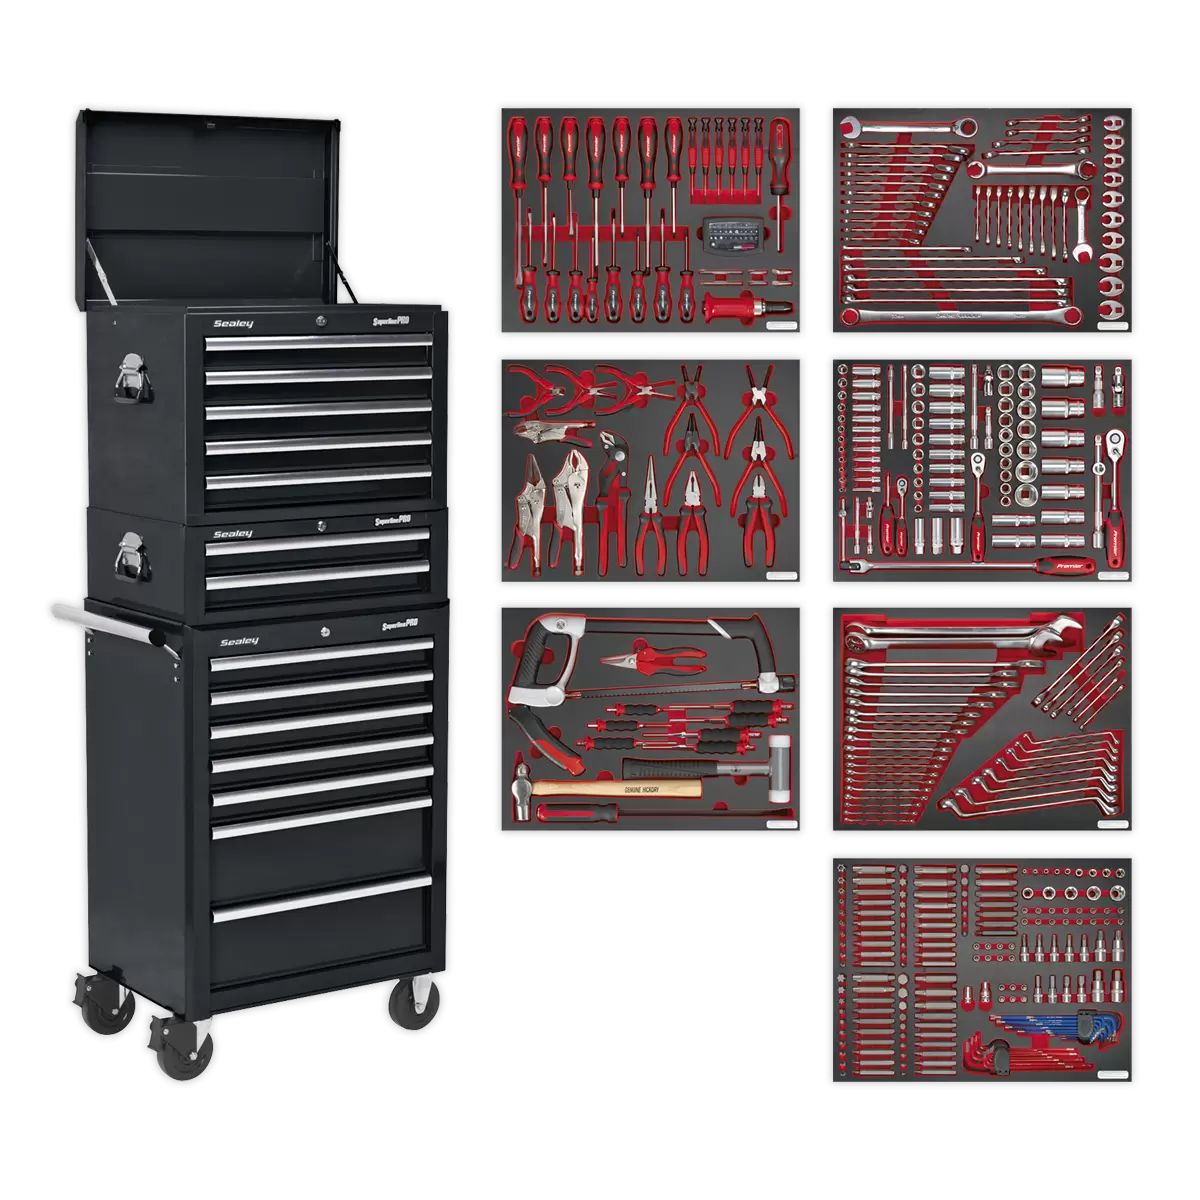 Sealey TBTPCOMBO2 Tool Chest Combination 14 Drawer with Ball Bearing Slides Black & 446pc Tool Kit